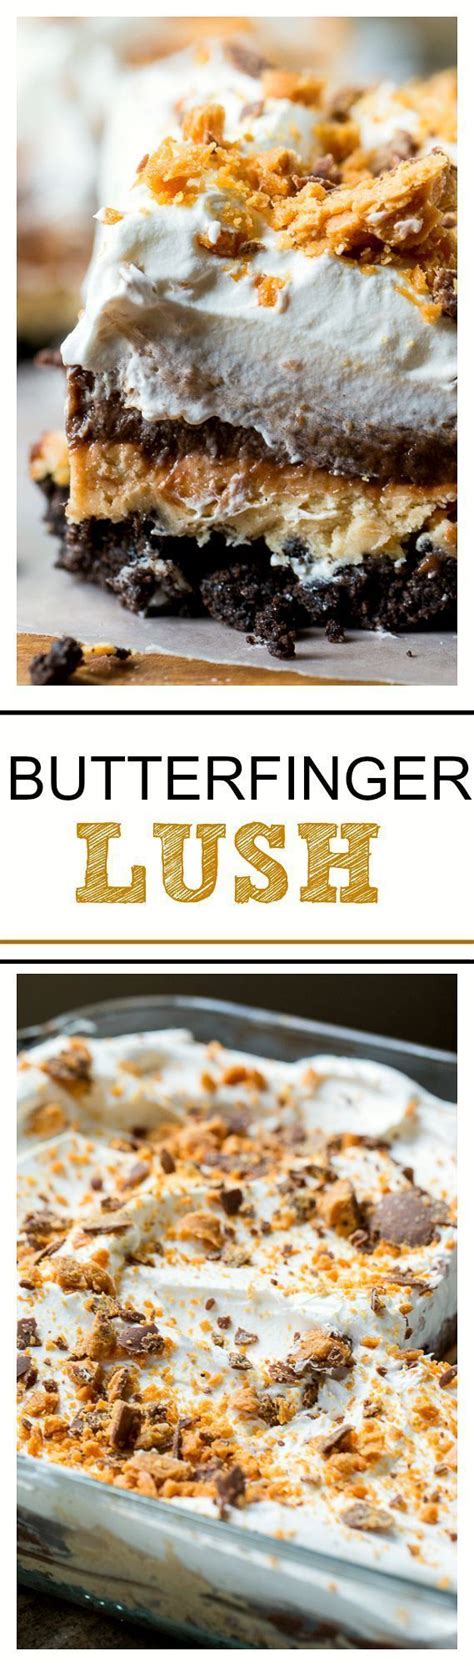 This isn't just any lush recipe as it is for butterfinger chocolate and peanut butter lush! Butterfinger Chocolate and Peanut Butter Lush - Spicy ...